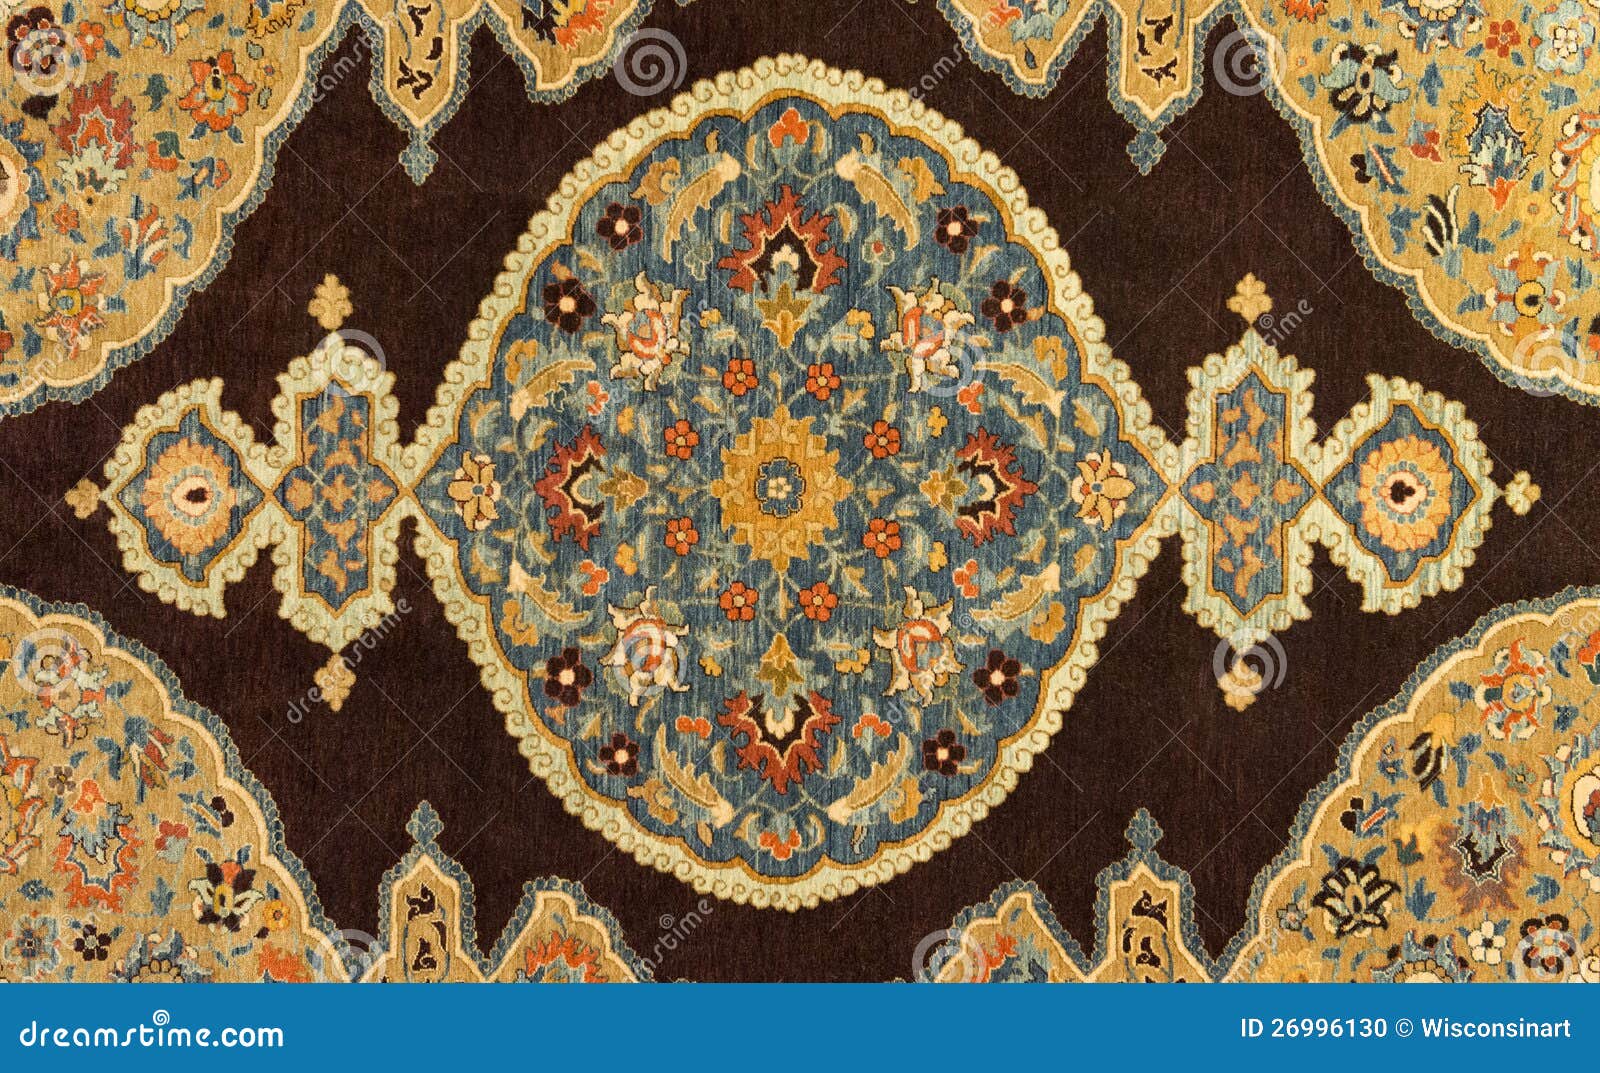 Hand Woven Carpet Background Abstract Design Stock Photo - Image ...